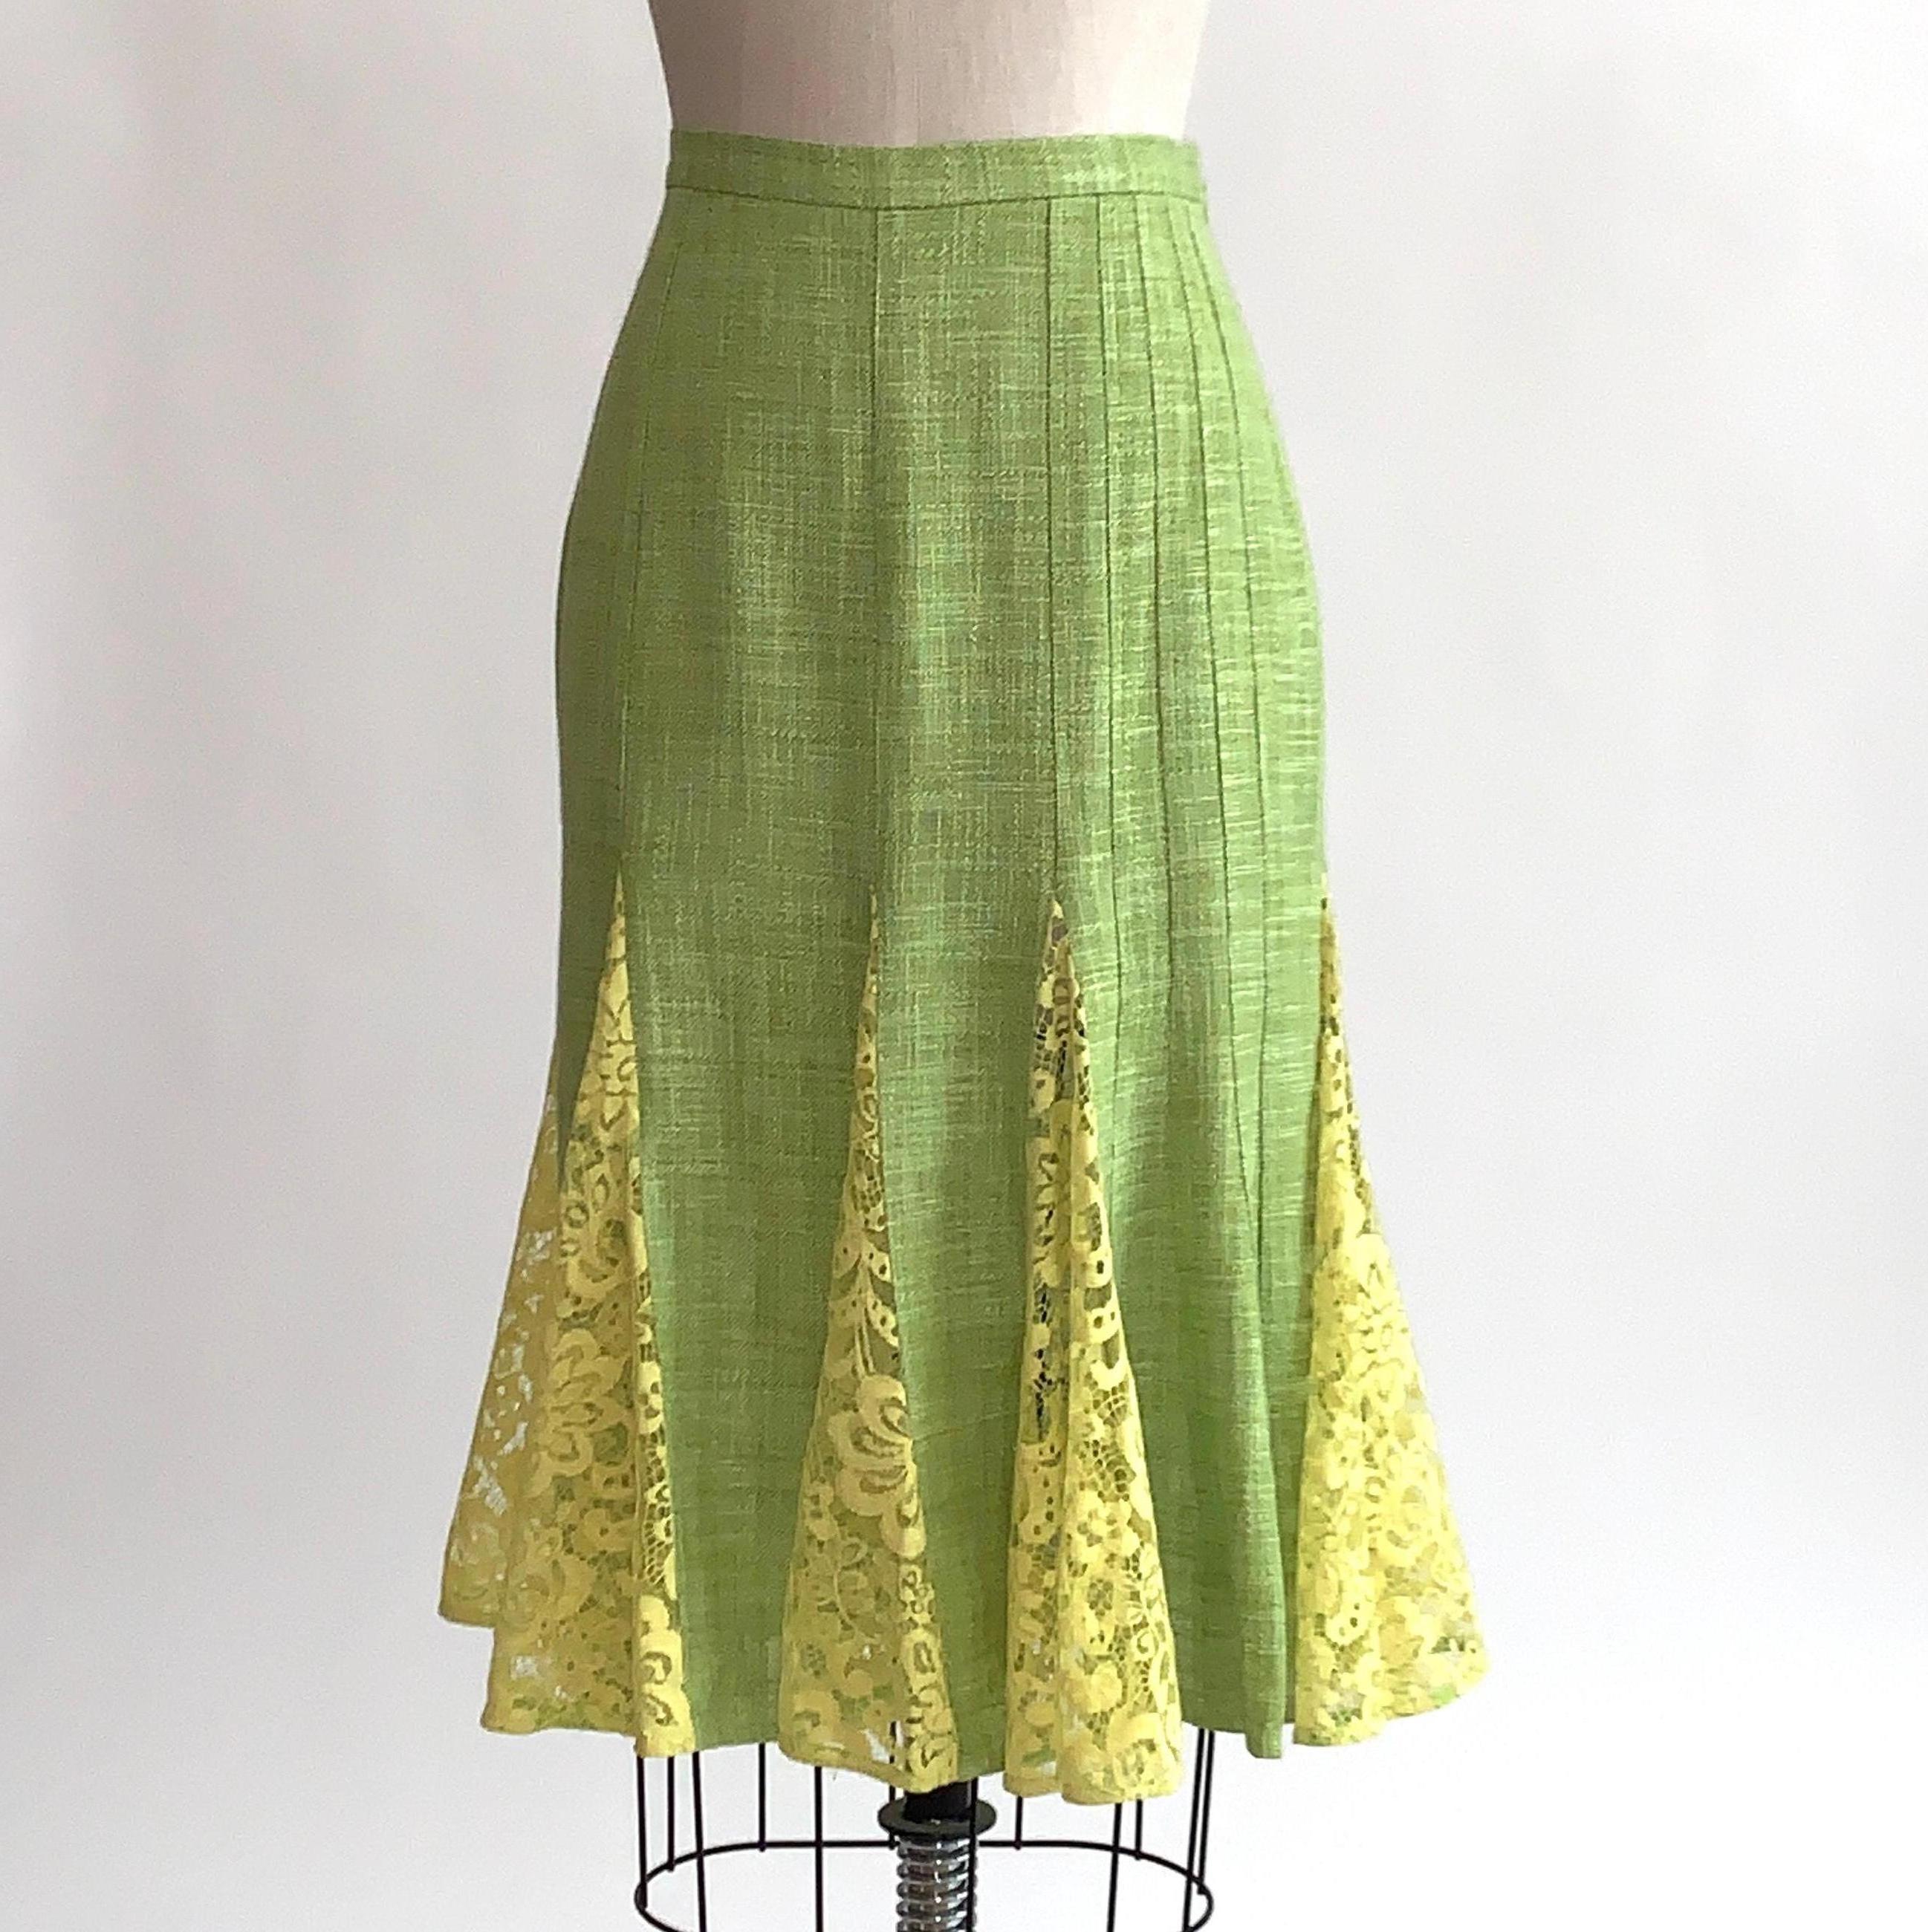 Dolce and Gabbana lime green fit and flare pencil skirt with yellow lace godet panels at bottom. Vertical seam detail at one side. Back zip and hook and eye.

100% viscose (linen-look.)
Unlined.

Made in Italy.

Size label has been removed, seems to